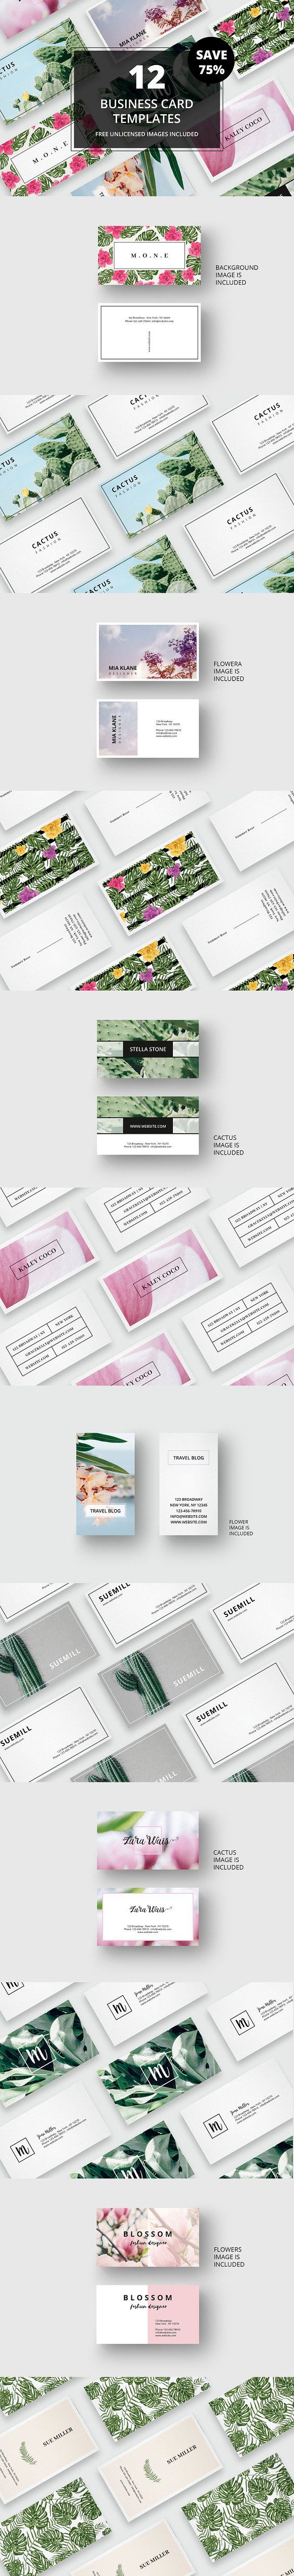 Business card bundle + images No. 01 in Business Card Templates - product preview 12